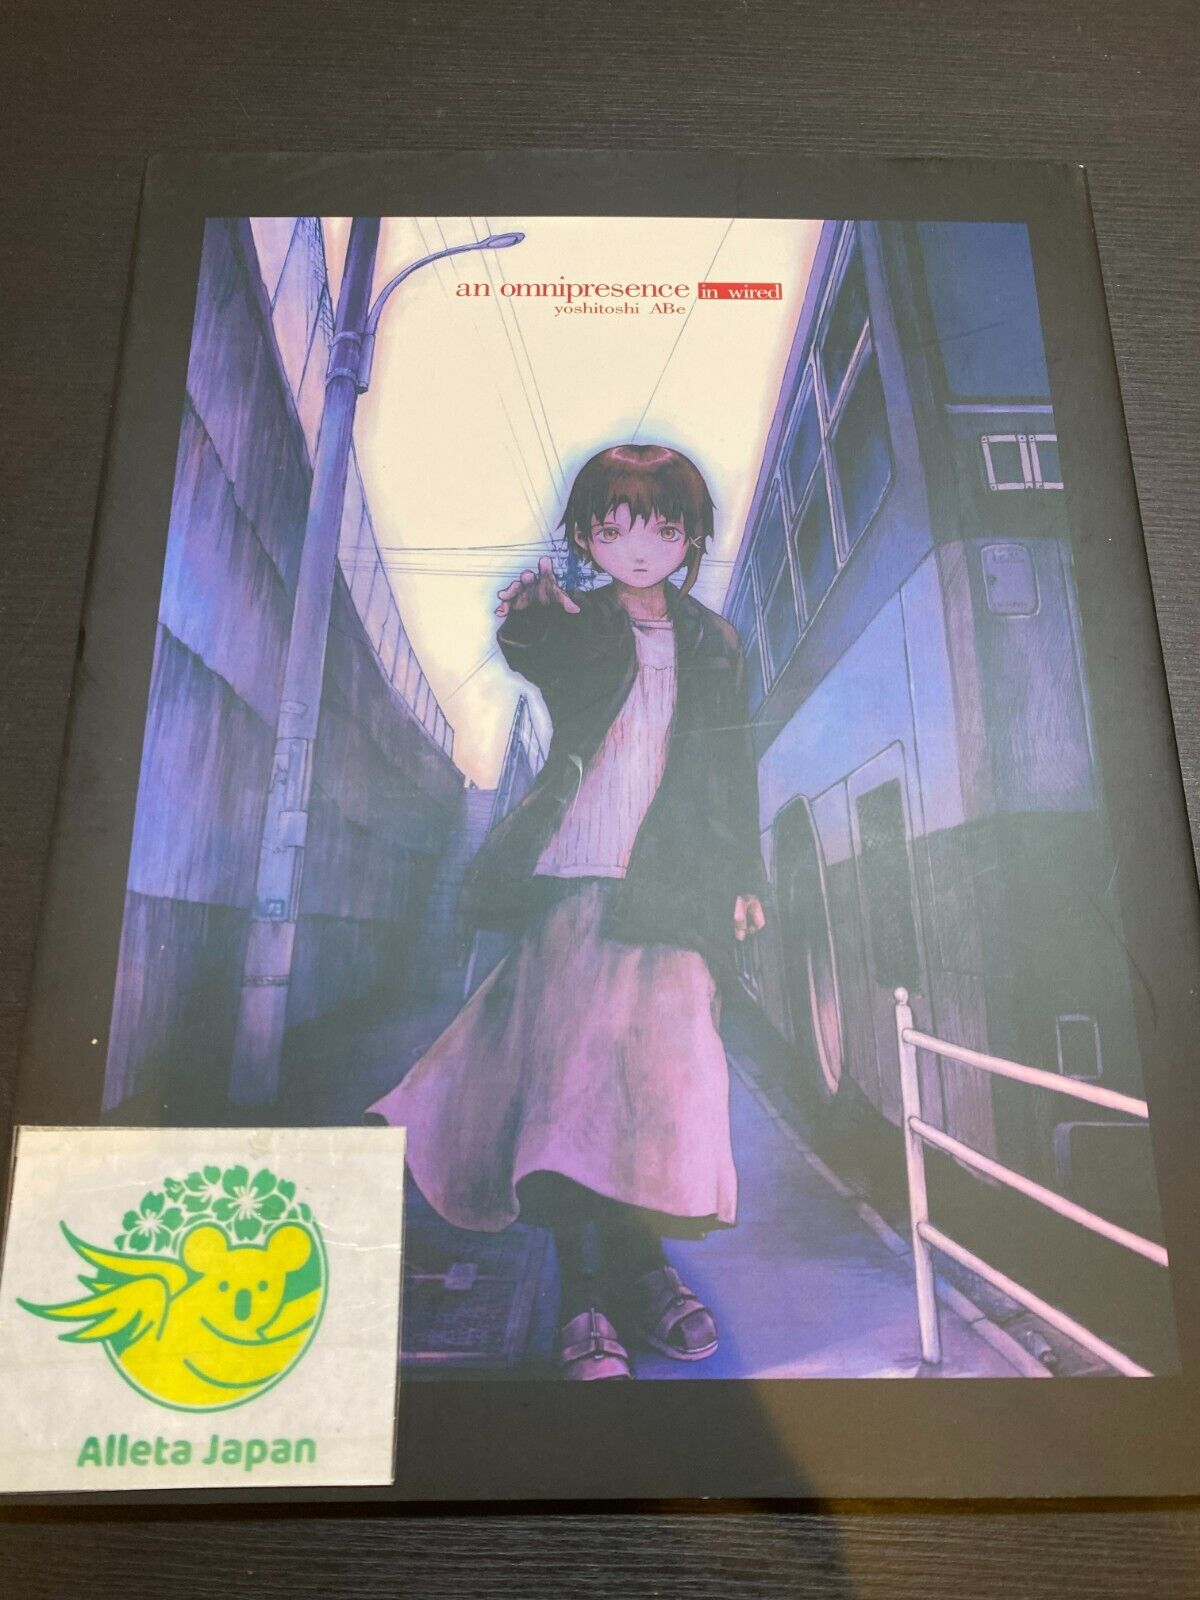 Yoshitoshi ABe serial experiments lain Art book an omnipresence in wired